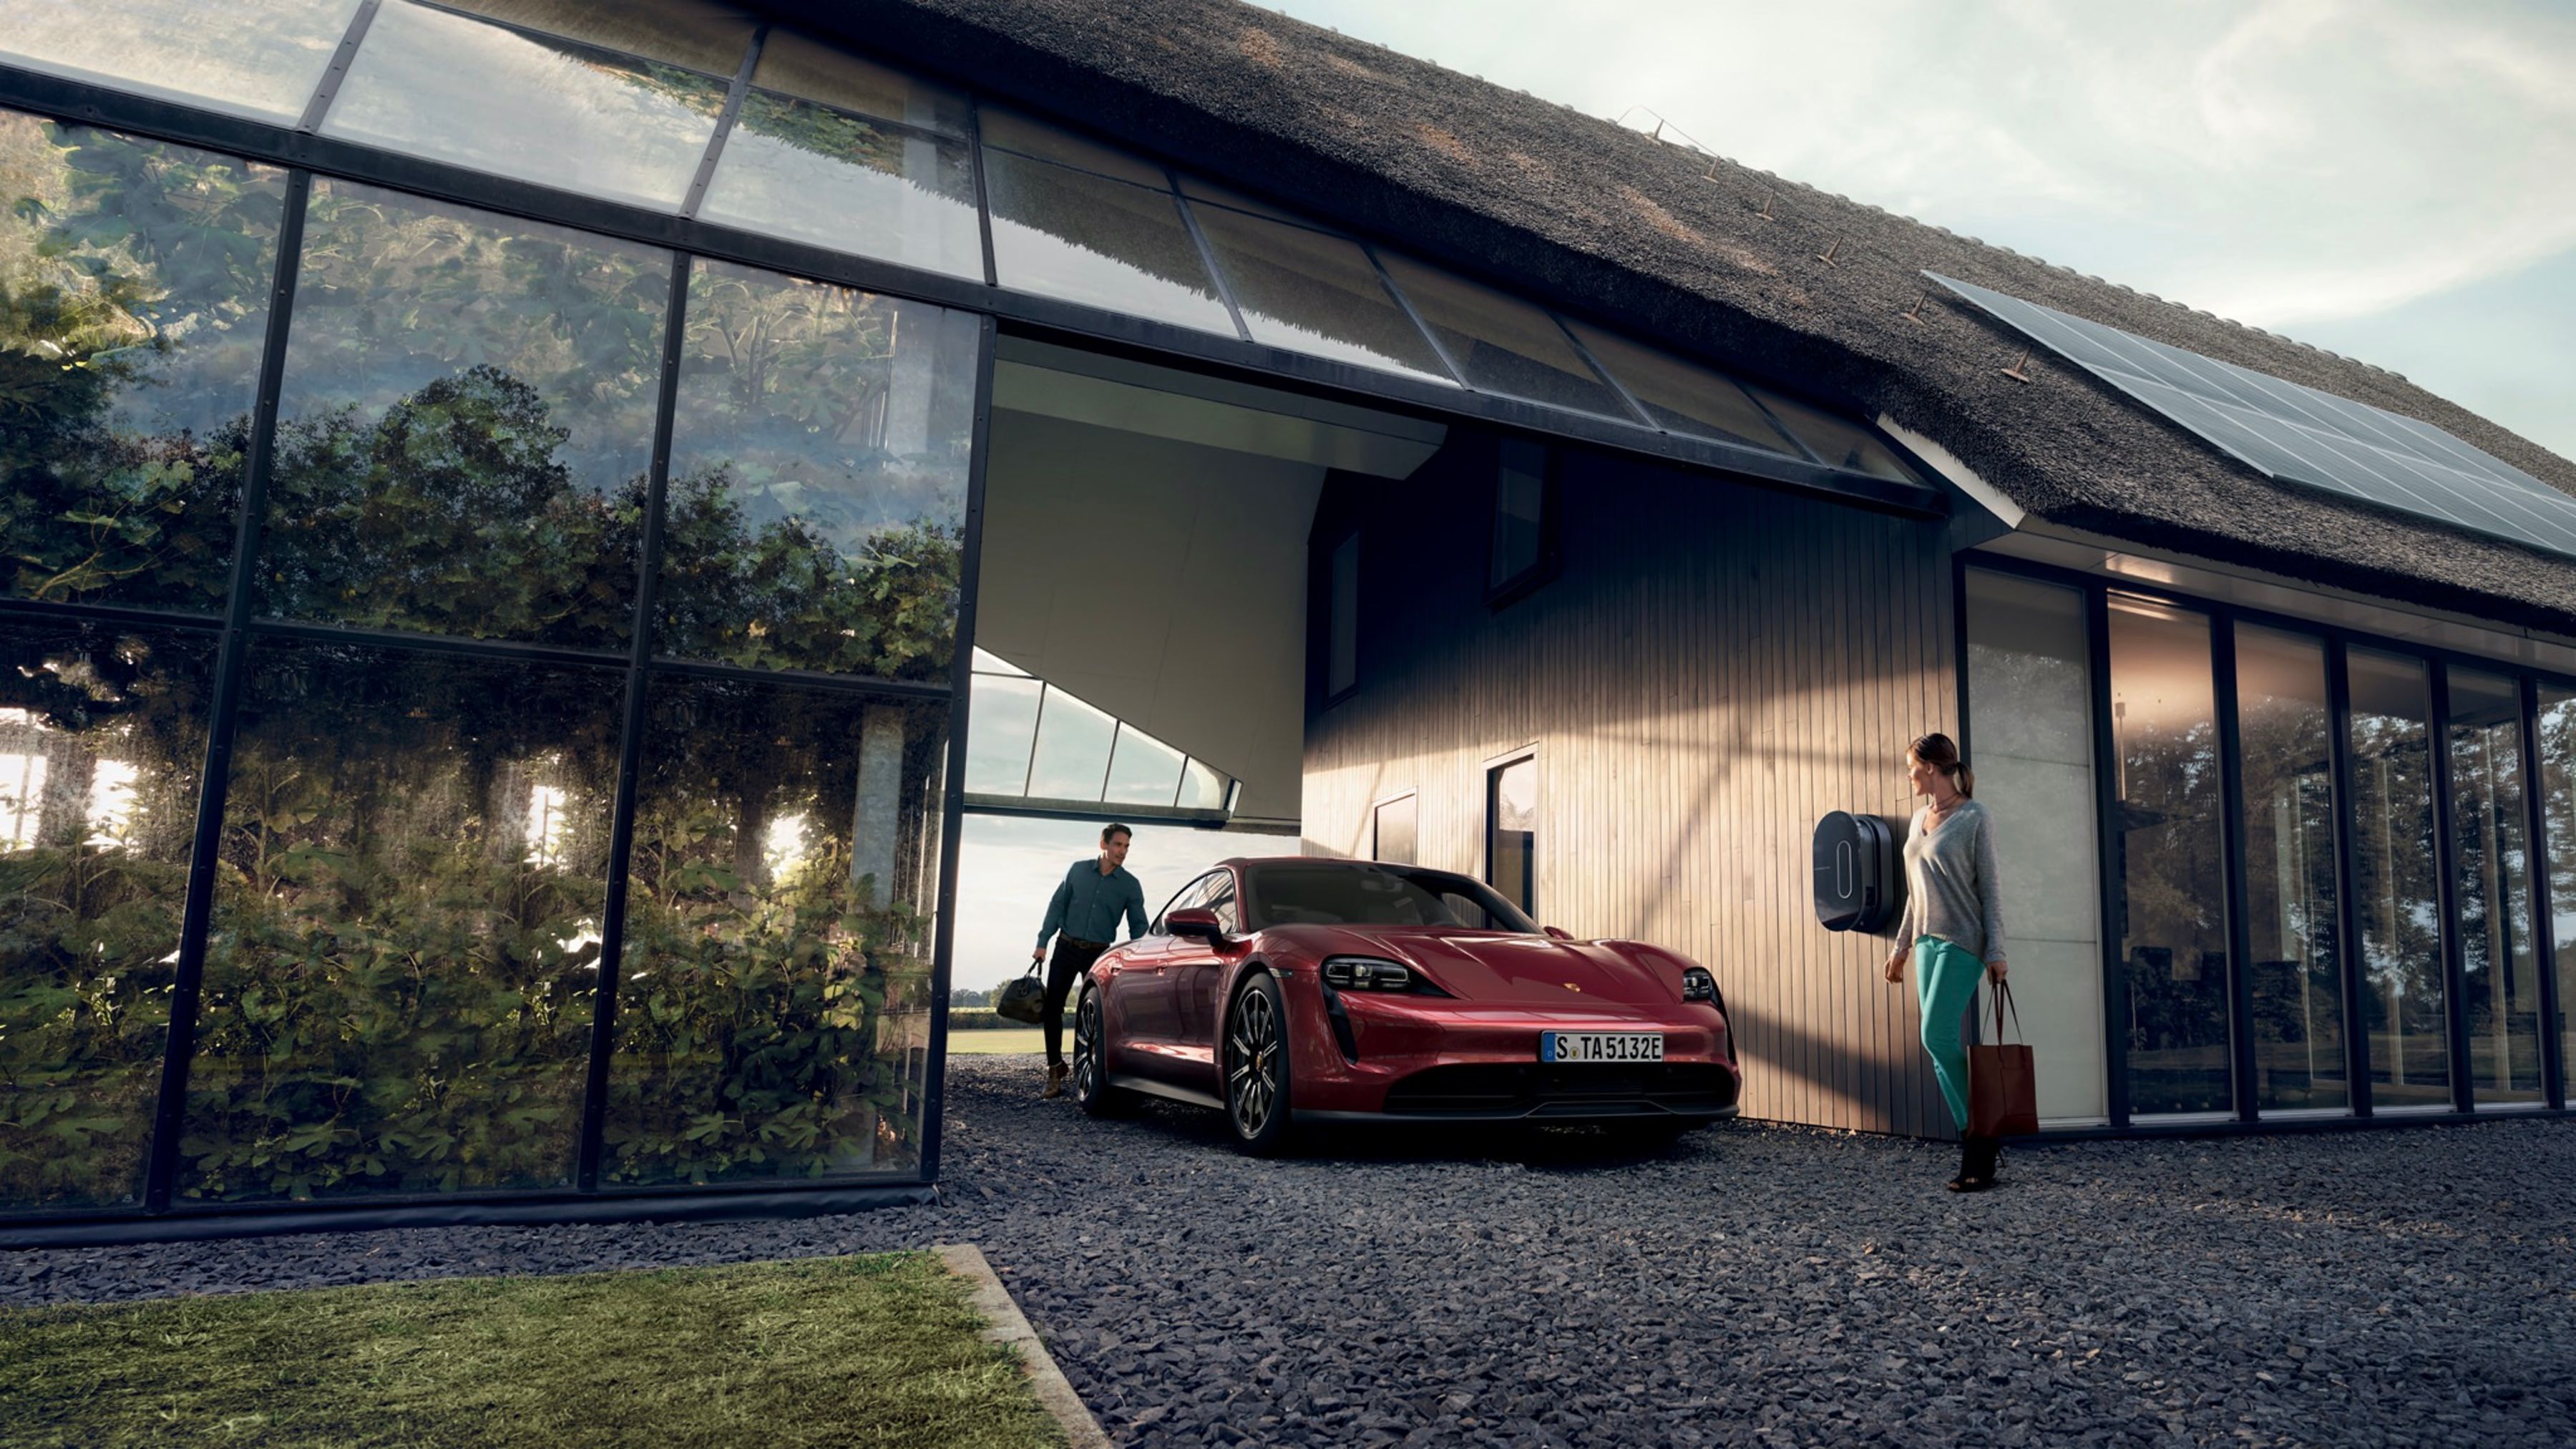 Porsche committed to reduced carbon footprint, 2021, Porsche AG